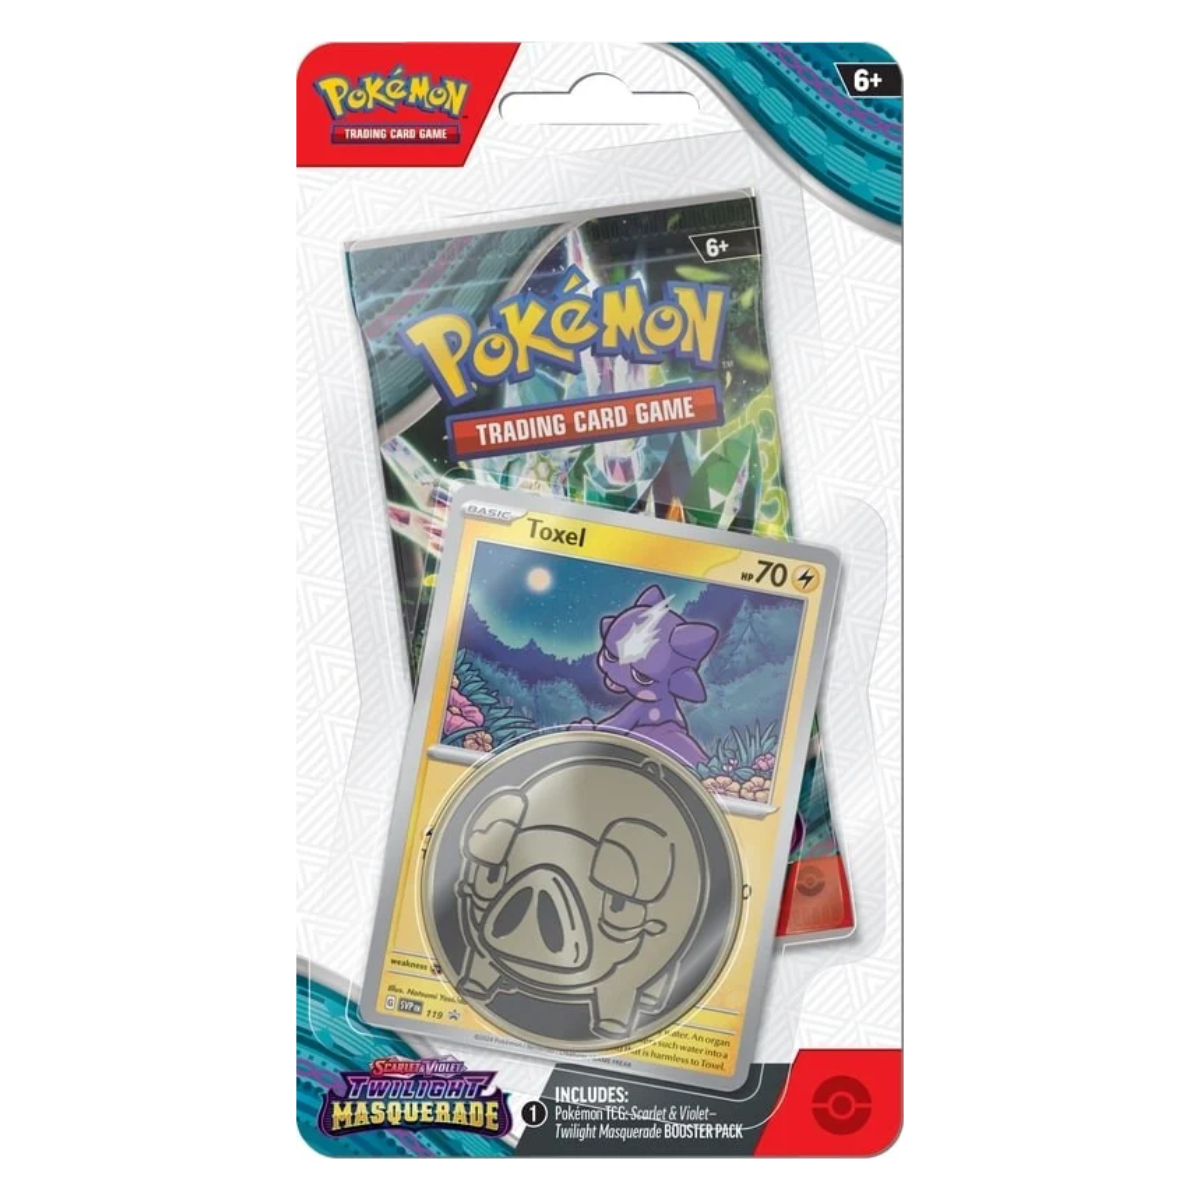 Twilight Masquerade Single Booster Blister with either Pupitar or Toxel Promo